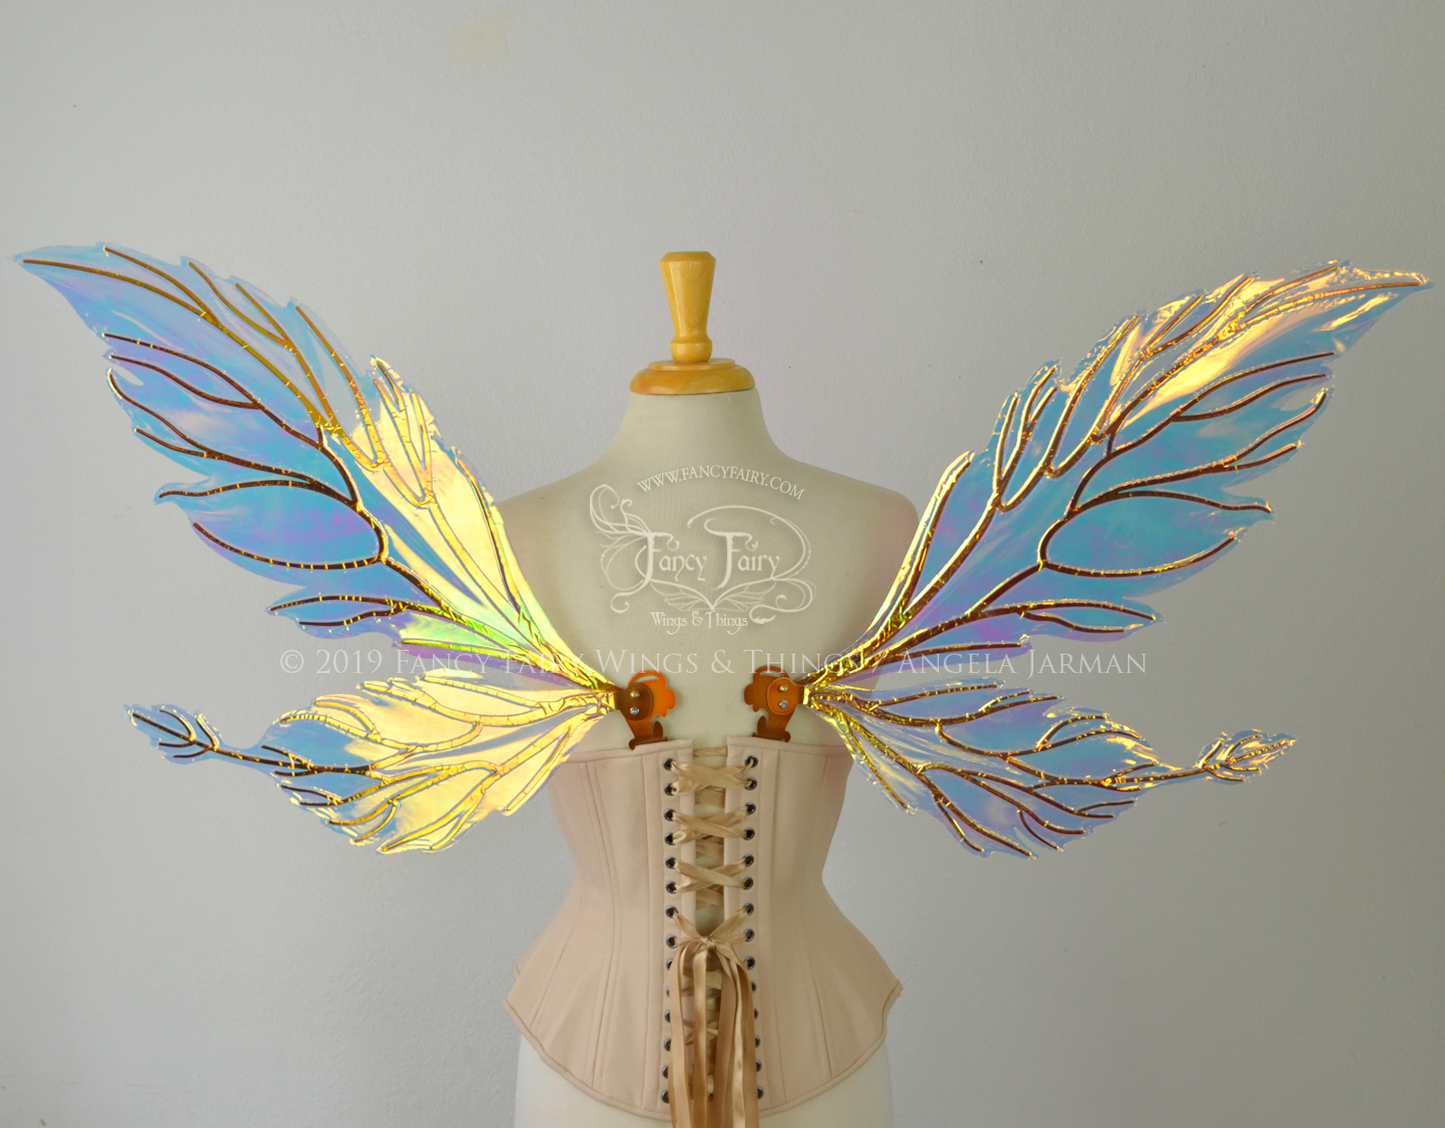 Ivy Iridescent Convertible Fairy Wings in Clear Diamond Fire with Copper veins